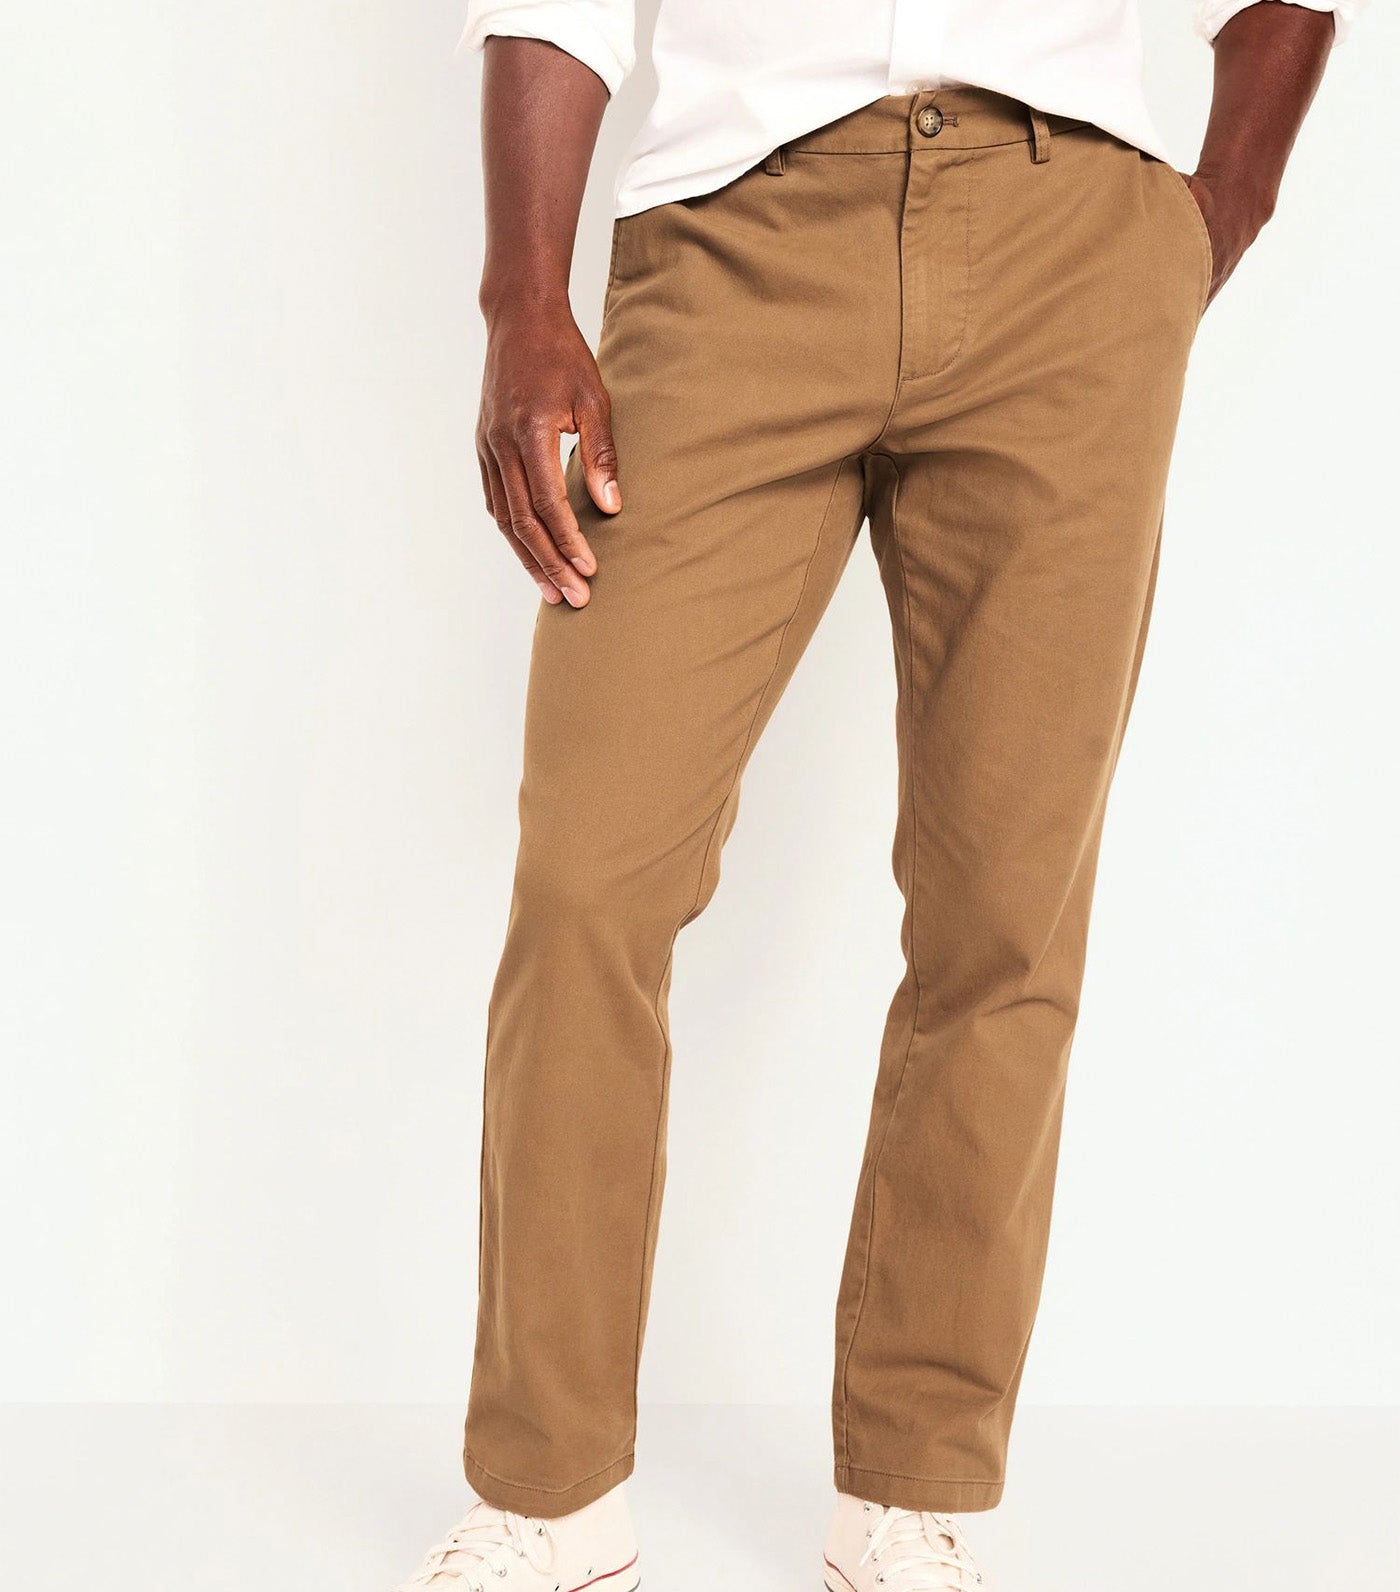 Straight Built-In Flex Rotation Chino Pants for Men Doe A Deer